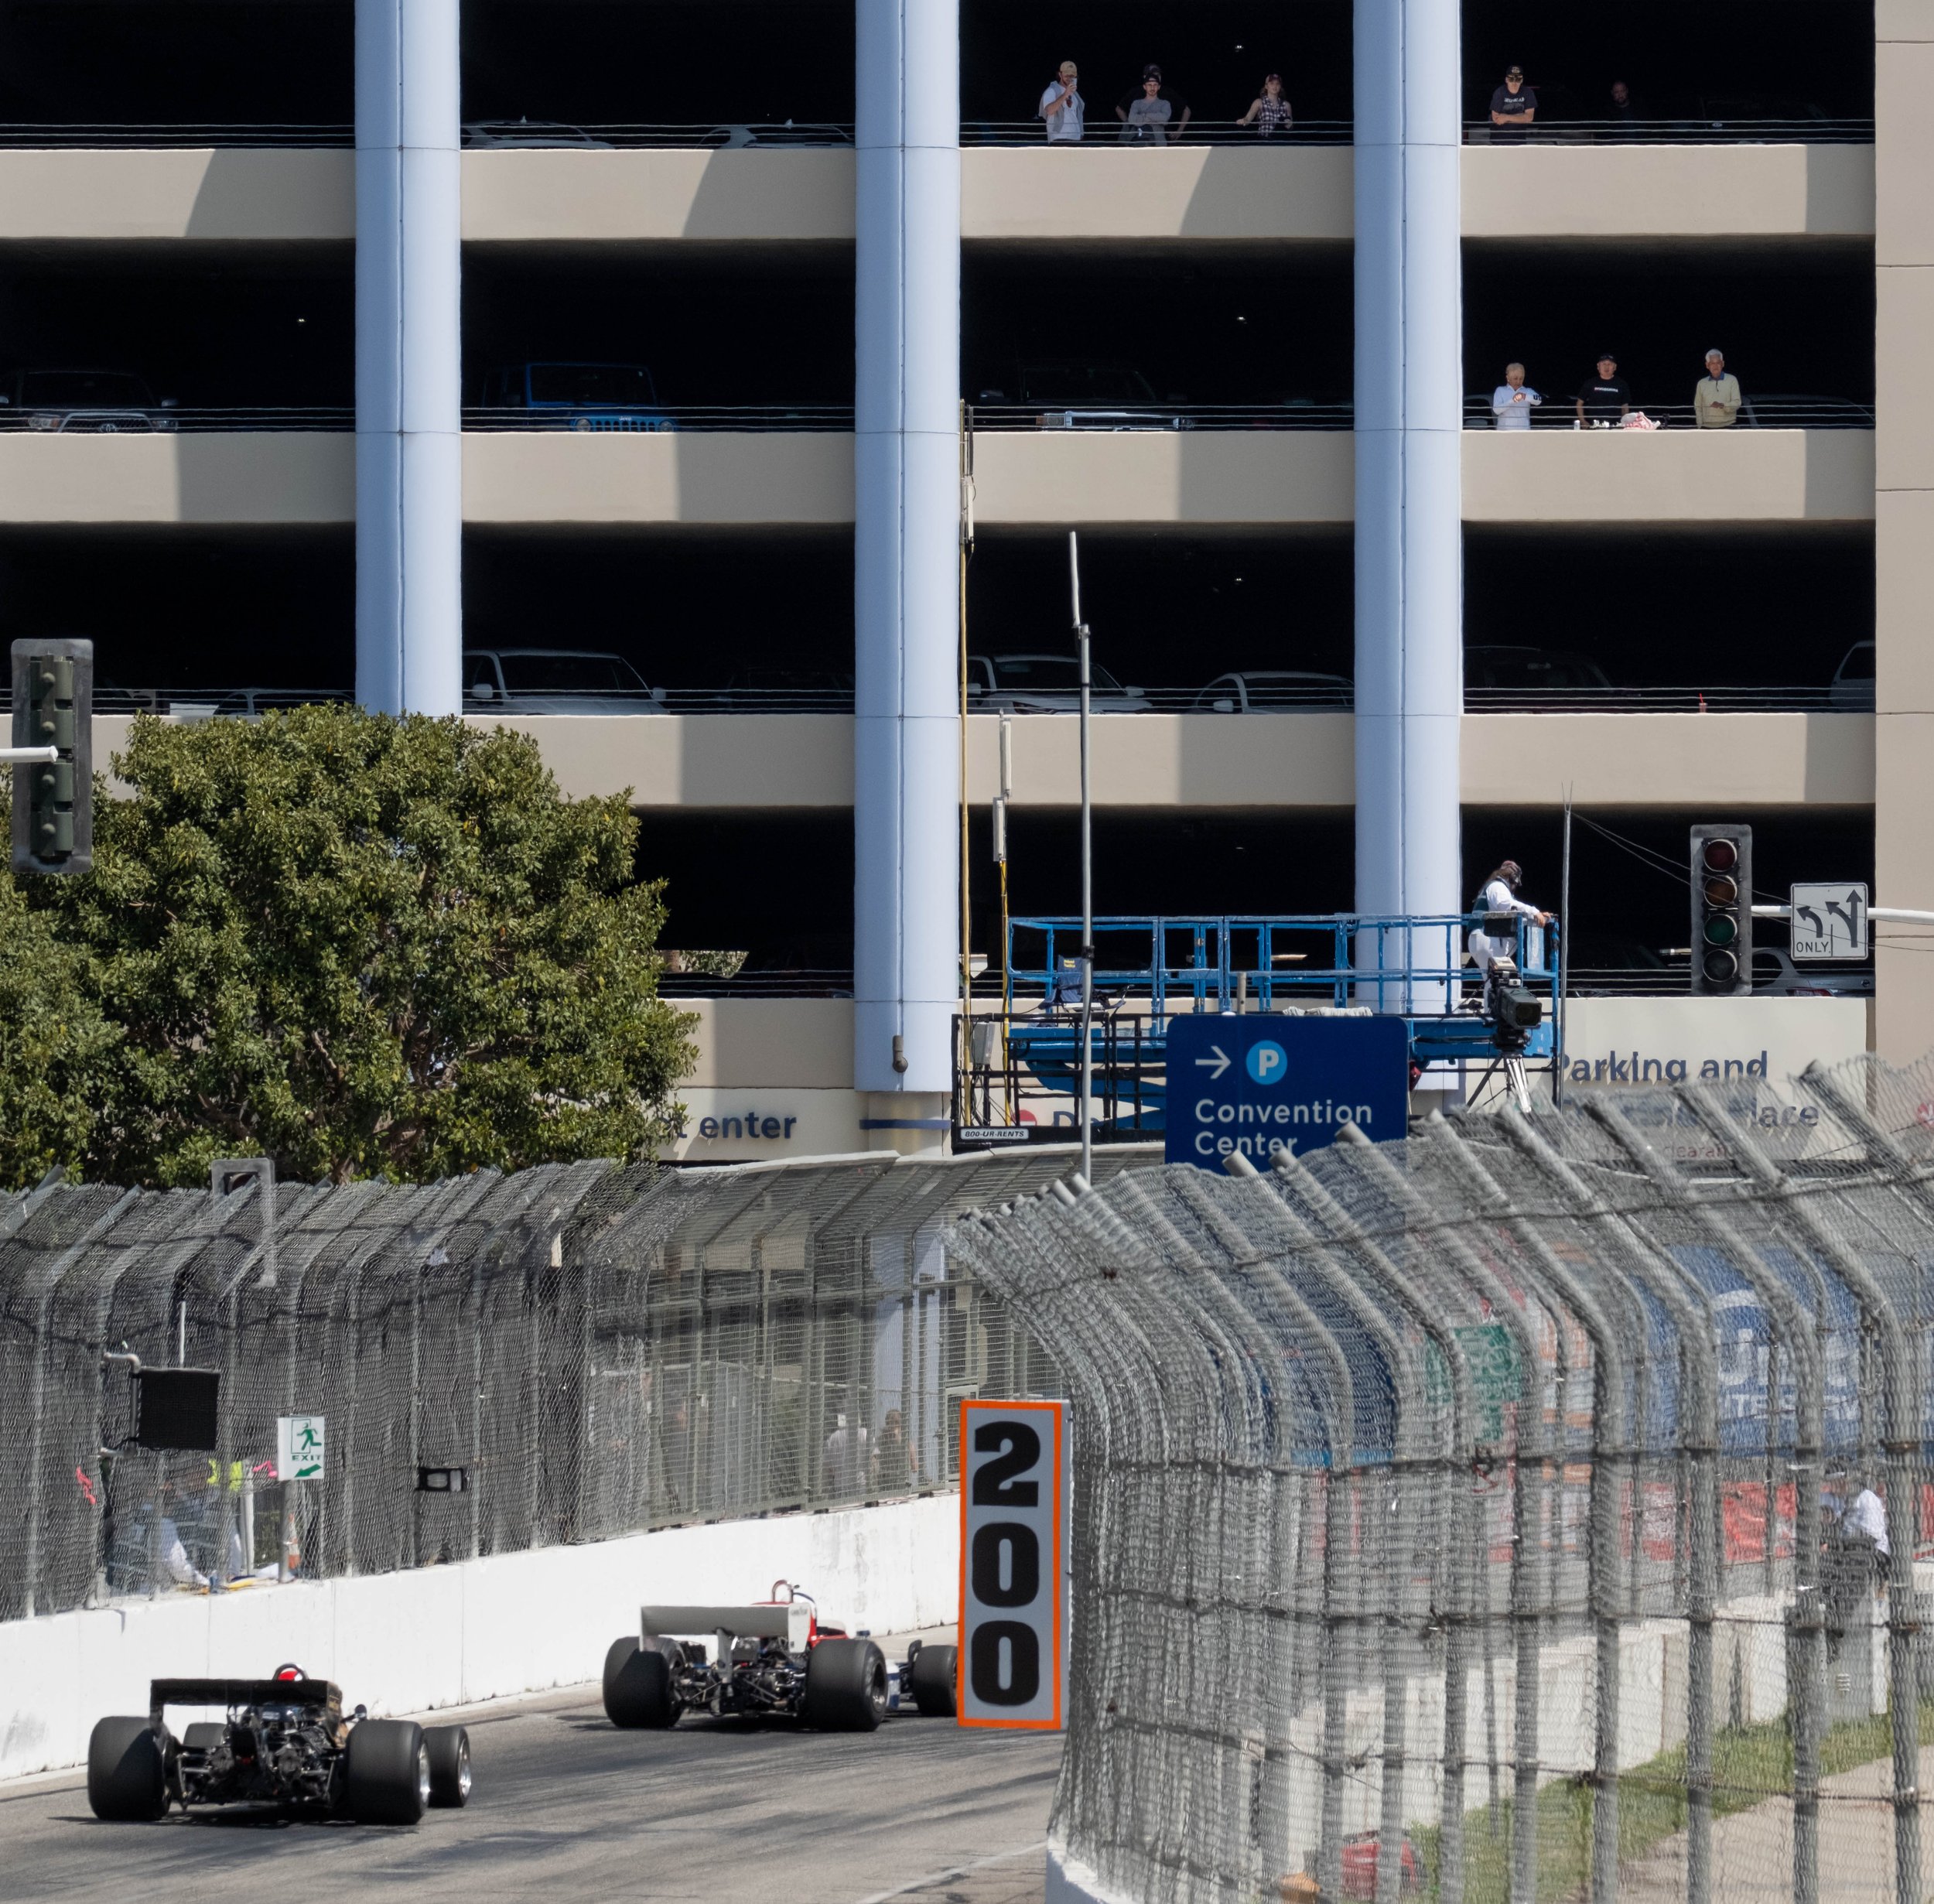  Spectators watching from parking structures during the Historic F1 Challenge from Acura's 48th Grand Prixon Saturday, April 15 at Long Beach, Calif. (Danilo Perez | The Corsair) 